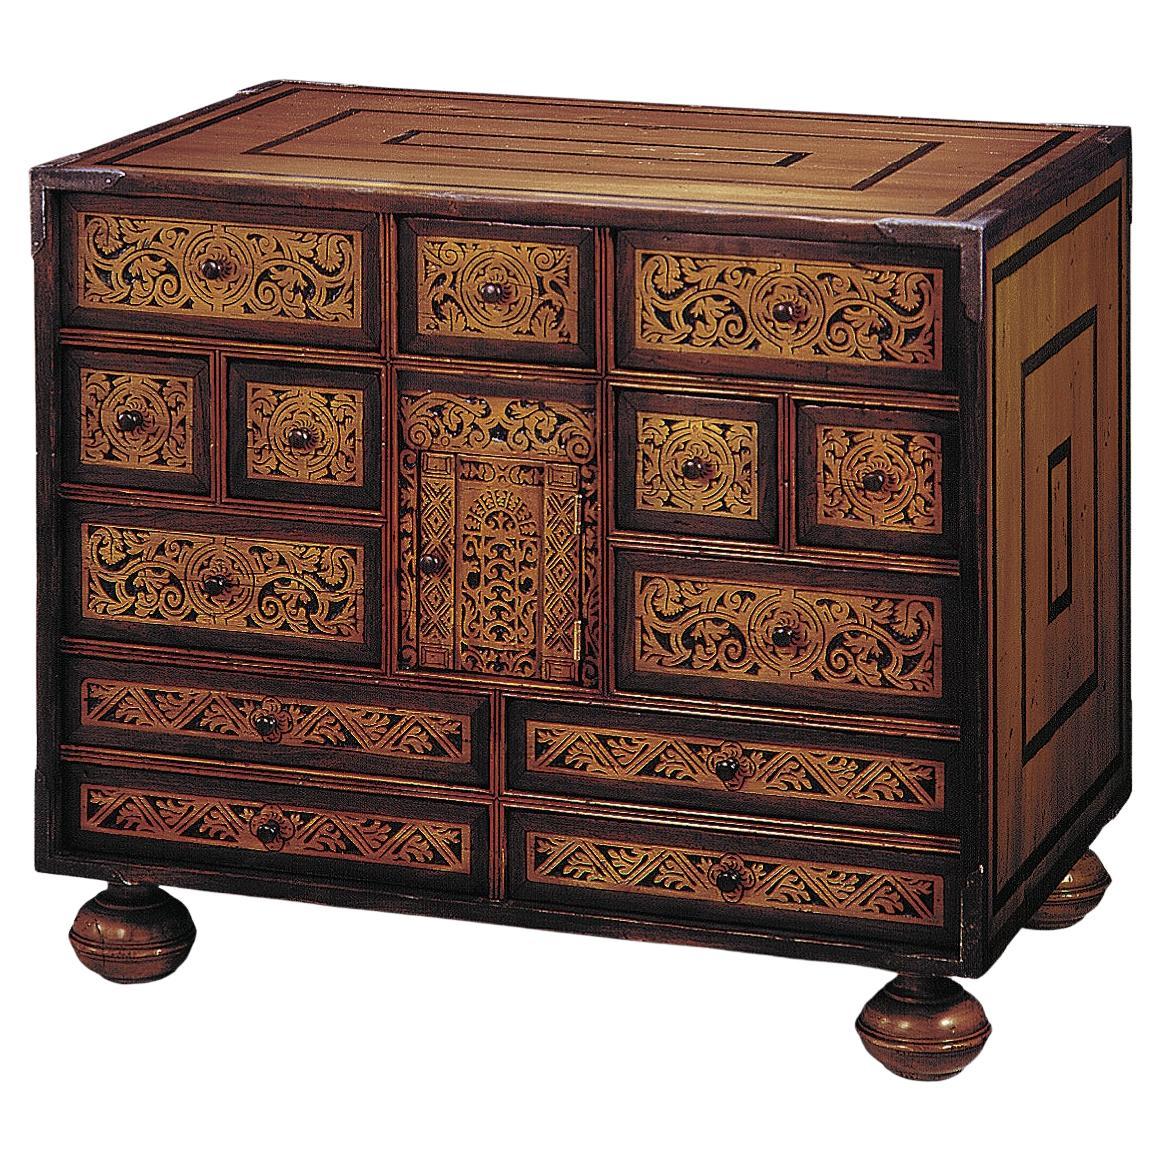 Oaxaqueño Bargueño inspired by 16th C Spanish-style furniture w/ drawers & doors For Sale